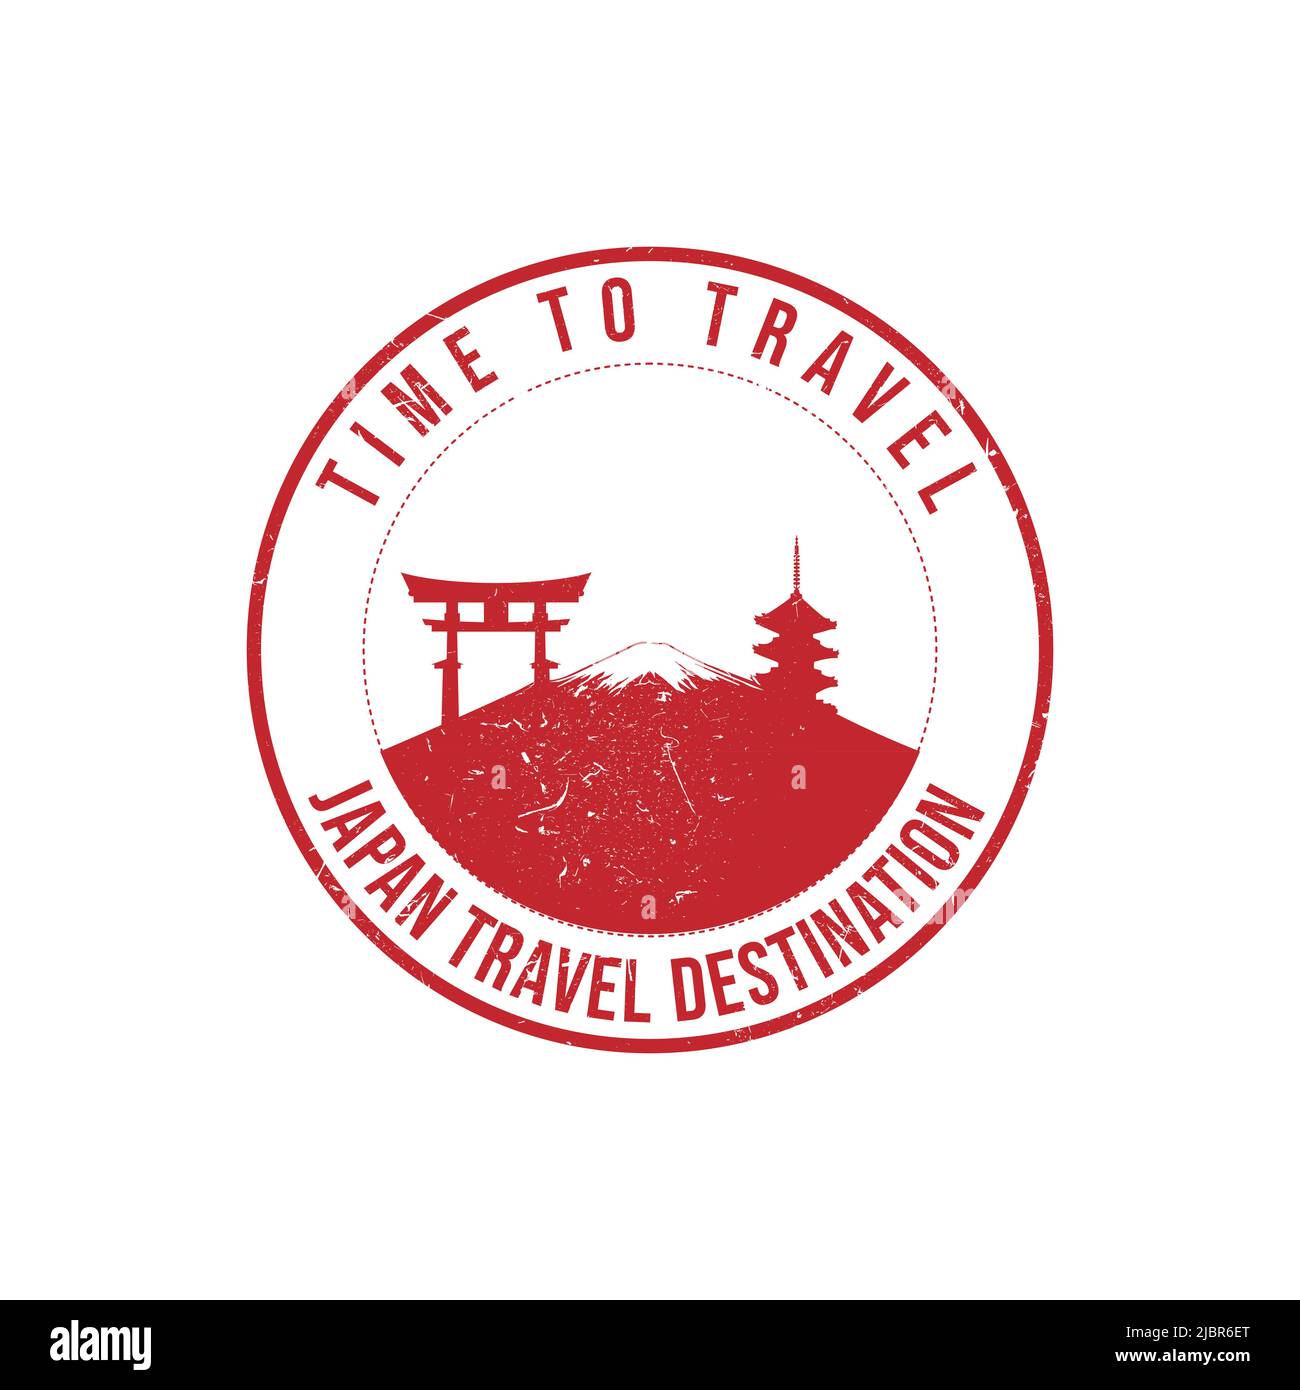 Grunge rubber stamp with the text Japan travel destination written inside the stamp. Time to travel. Silhouette of fuji mount and temple Japan histori Stock Vector